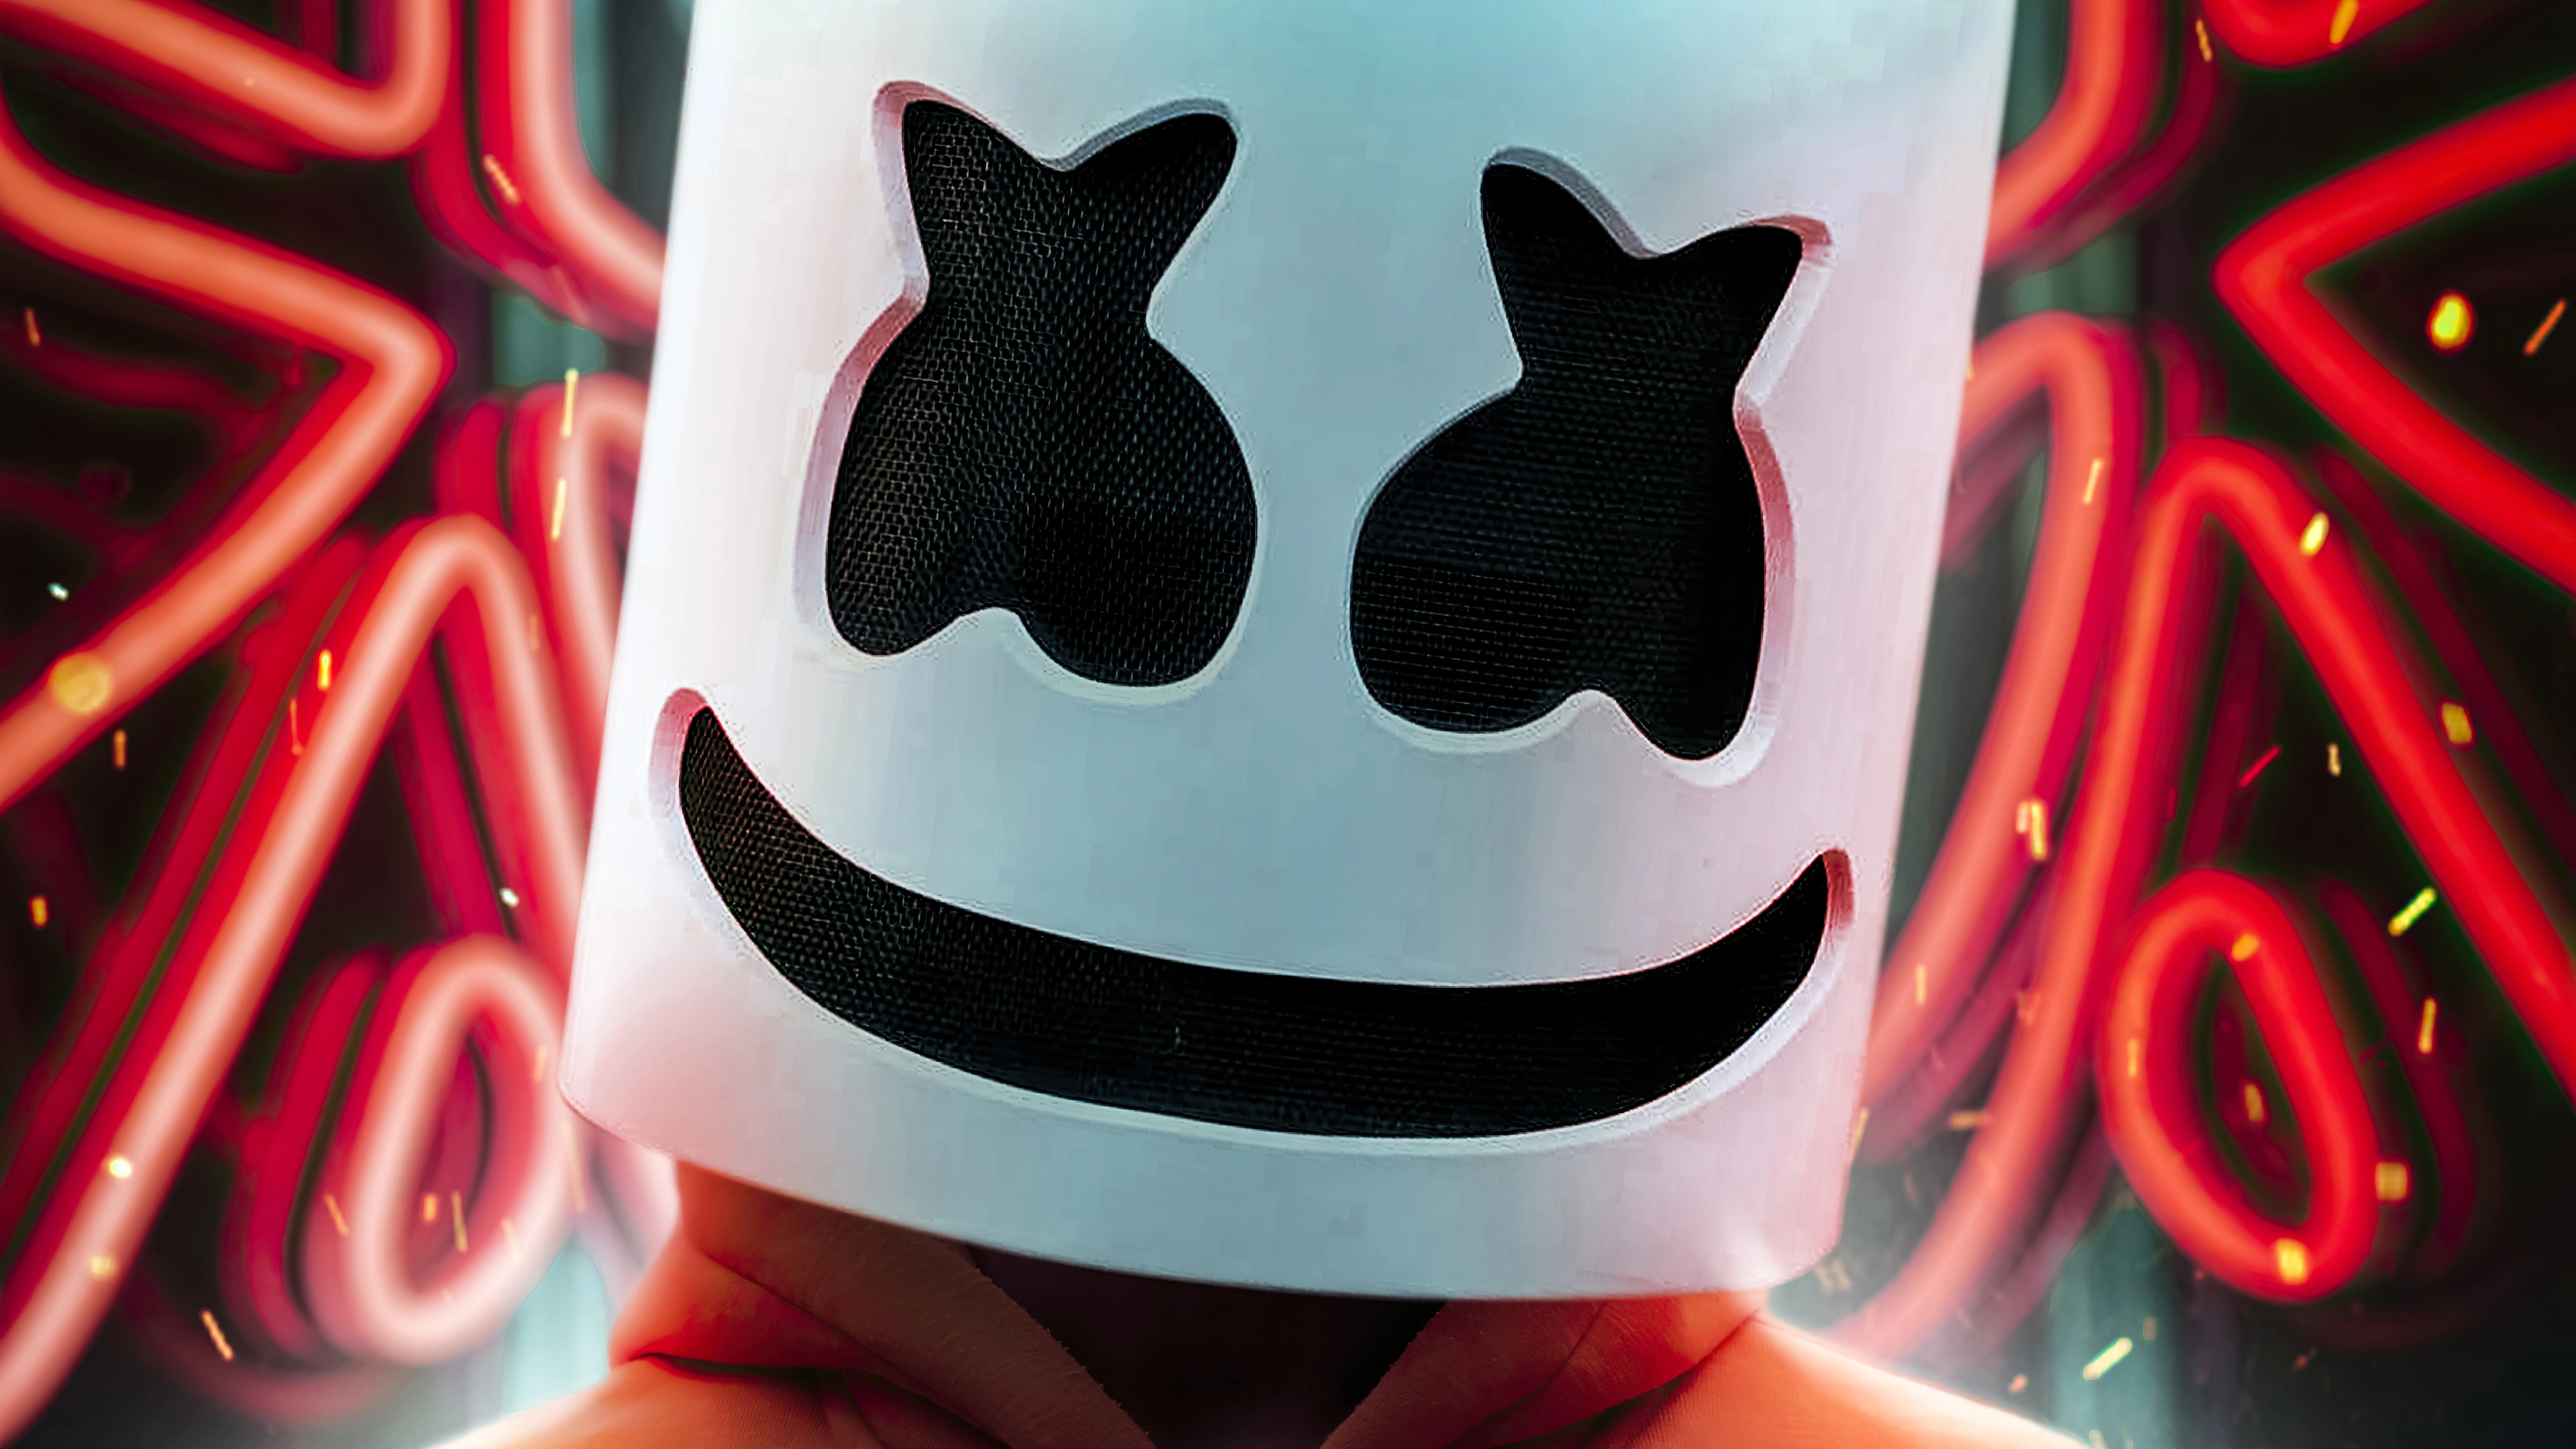 Android HD Marshmello 2020 Wallpapers  Wallpaper Cave  Best wallpapers  android Joker iphone wallpaper Iphone wallpaper for guys